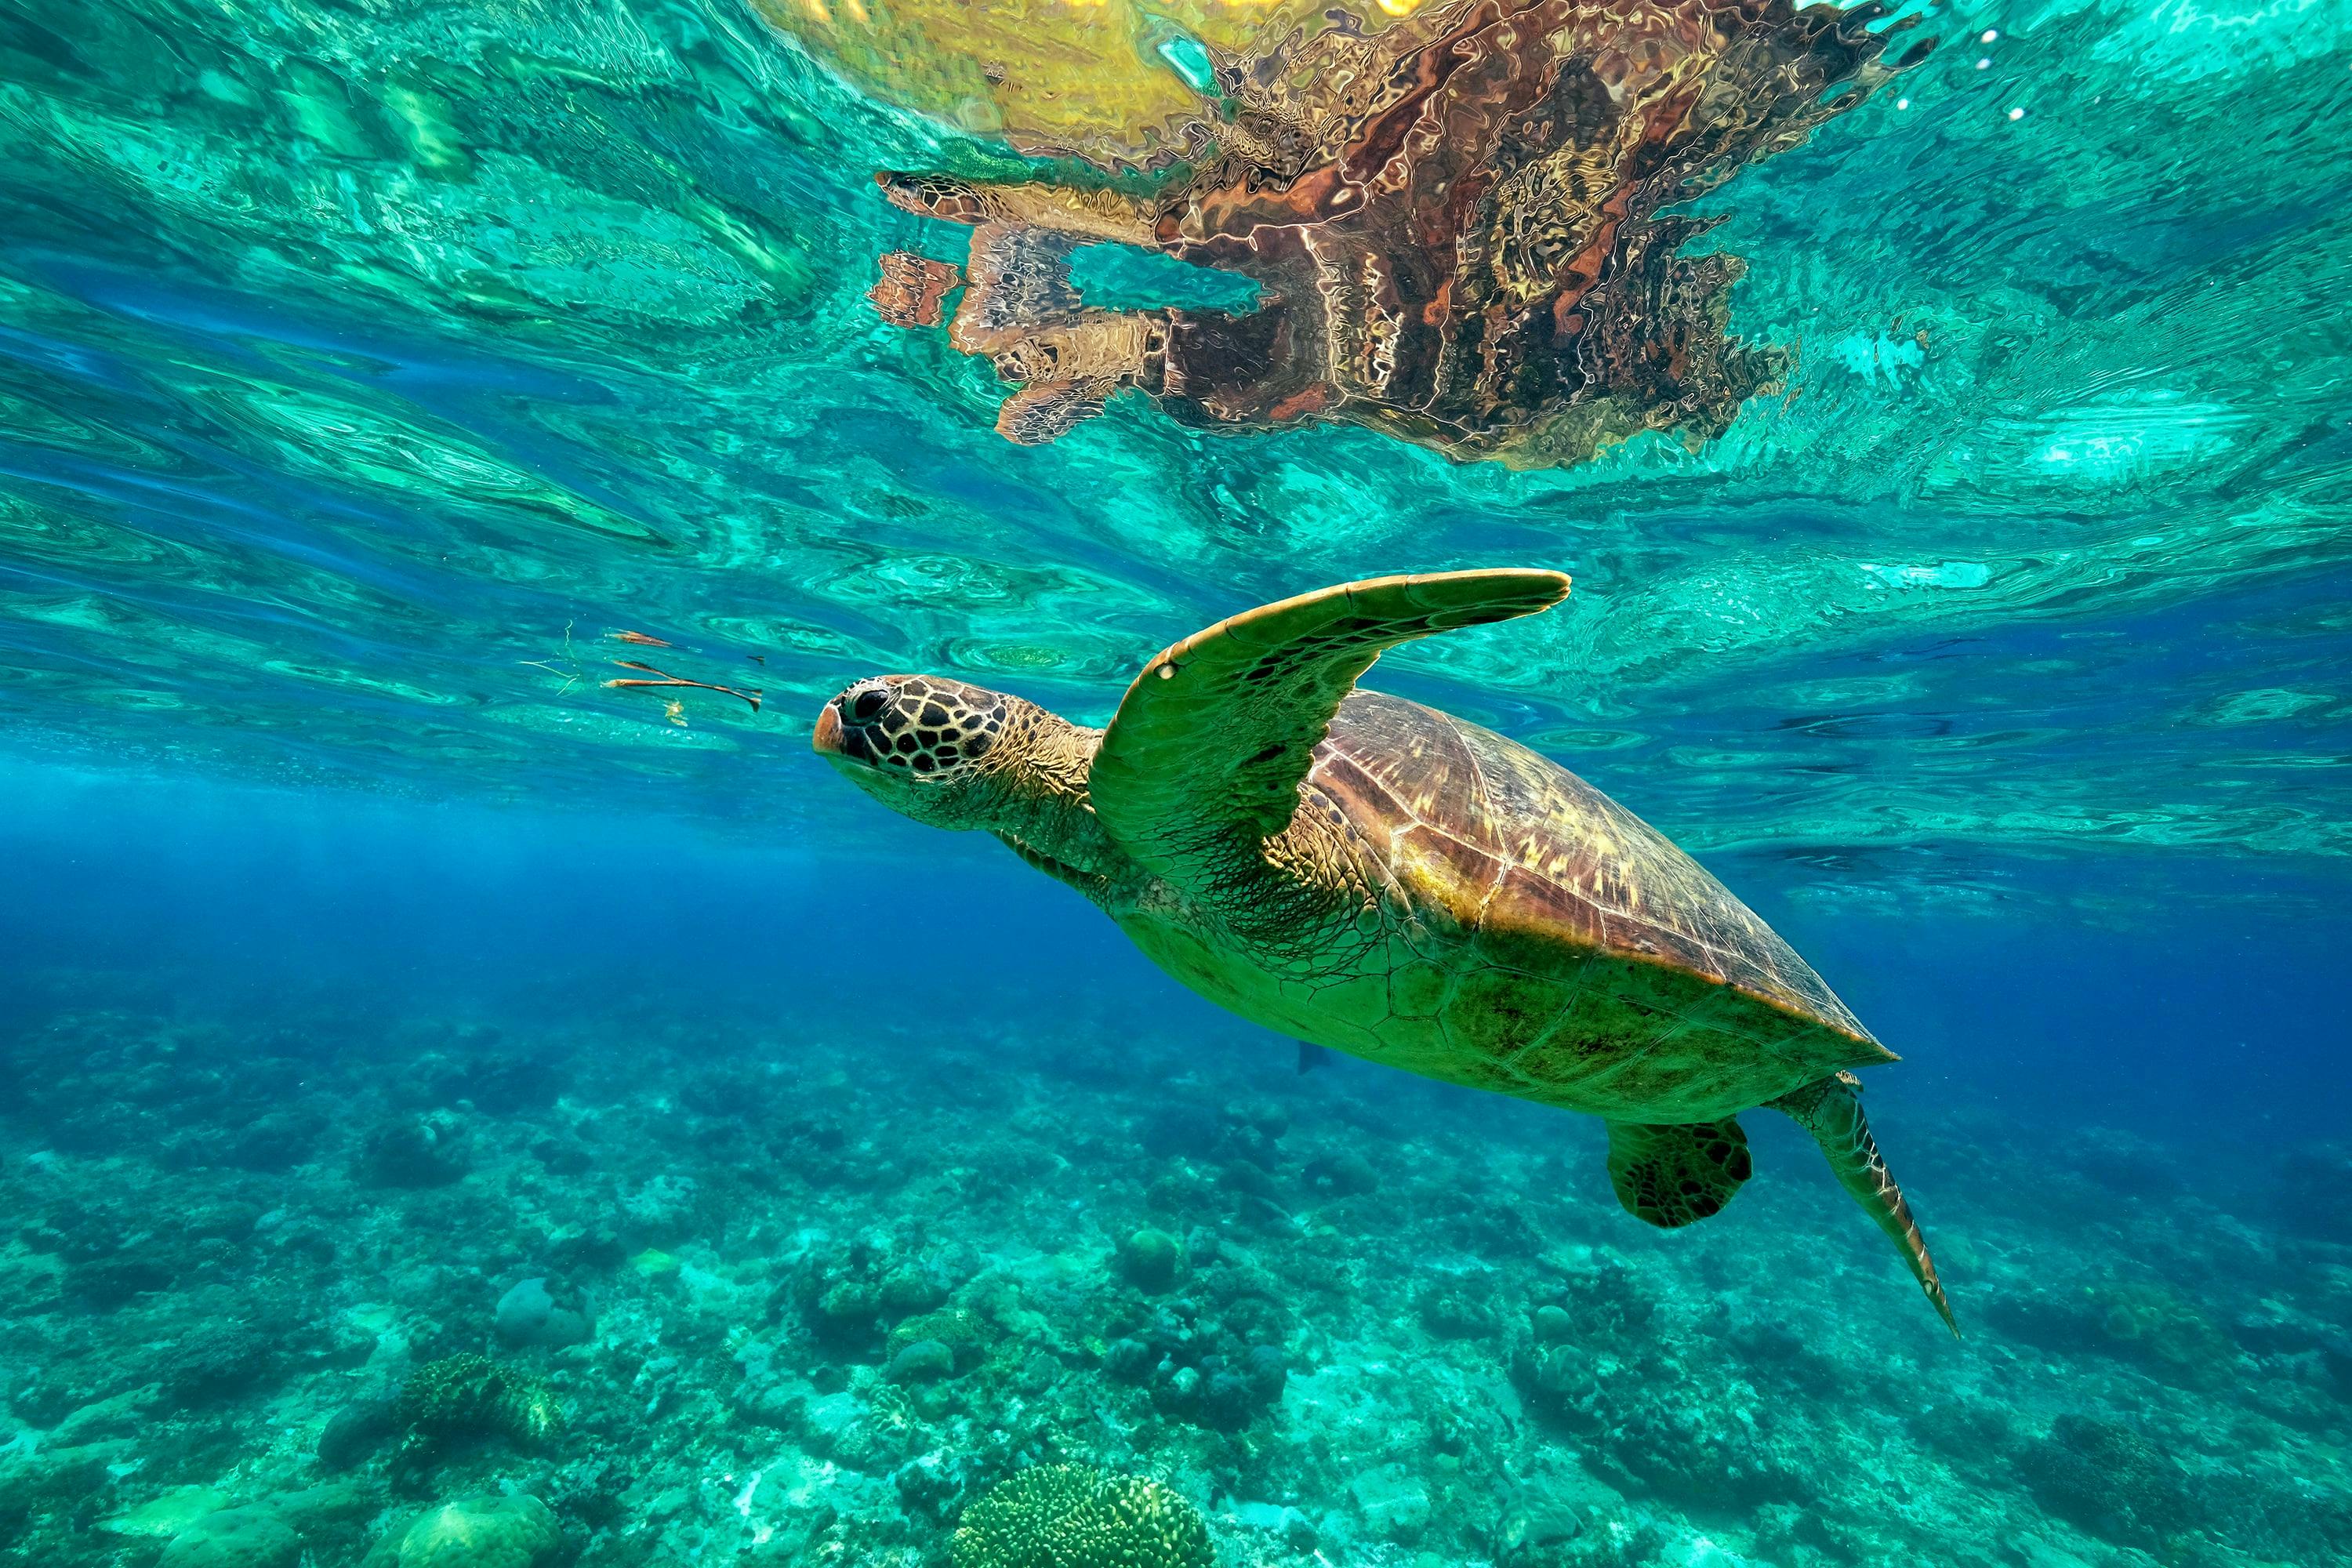 A sea turtle seen from Apo Island's clear blue waters